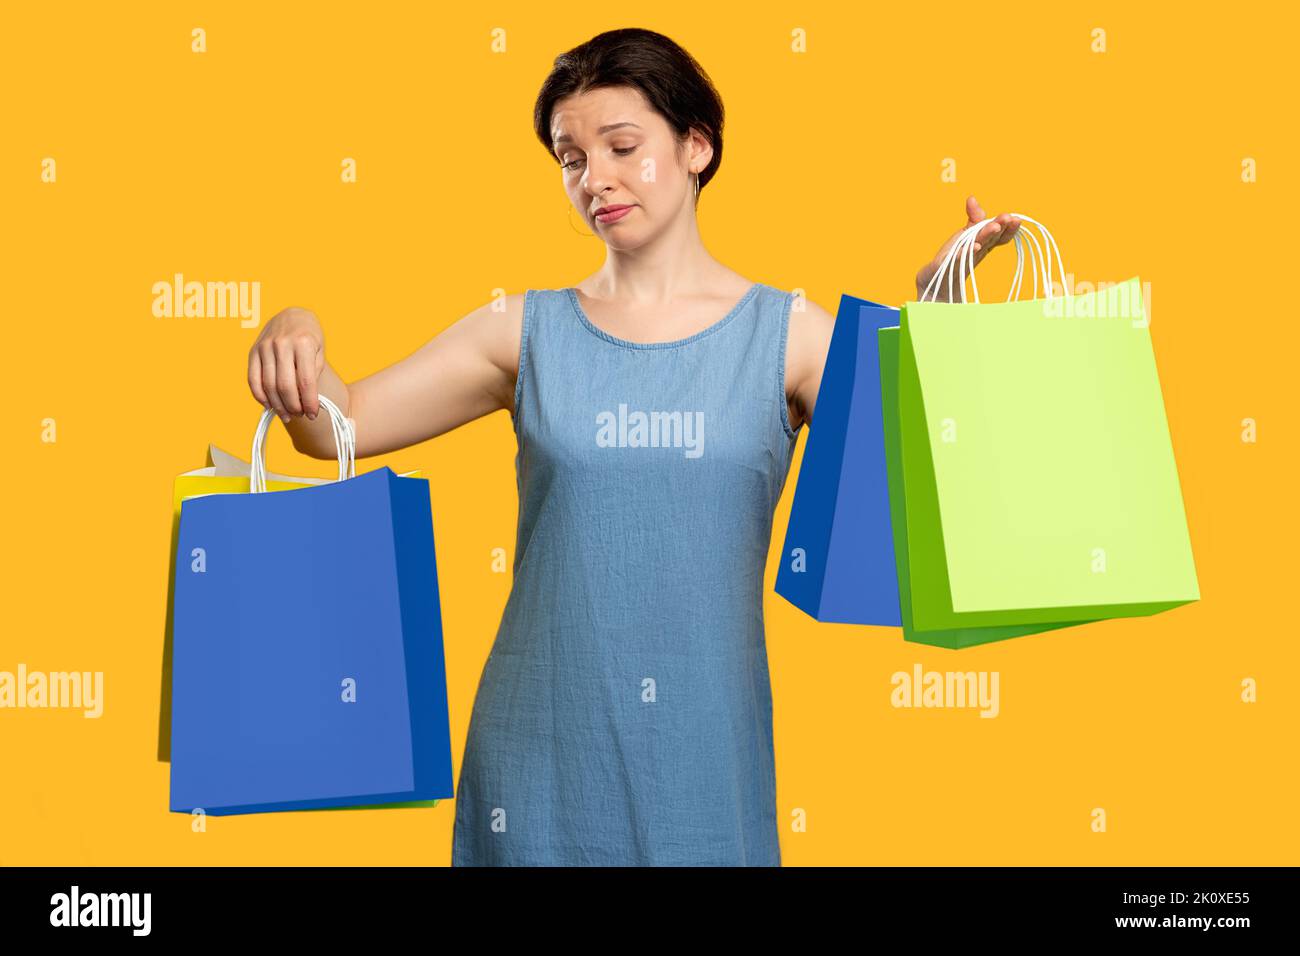 shopping addiction disappointed emotion sad woman Stock Photo